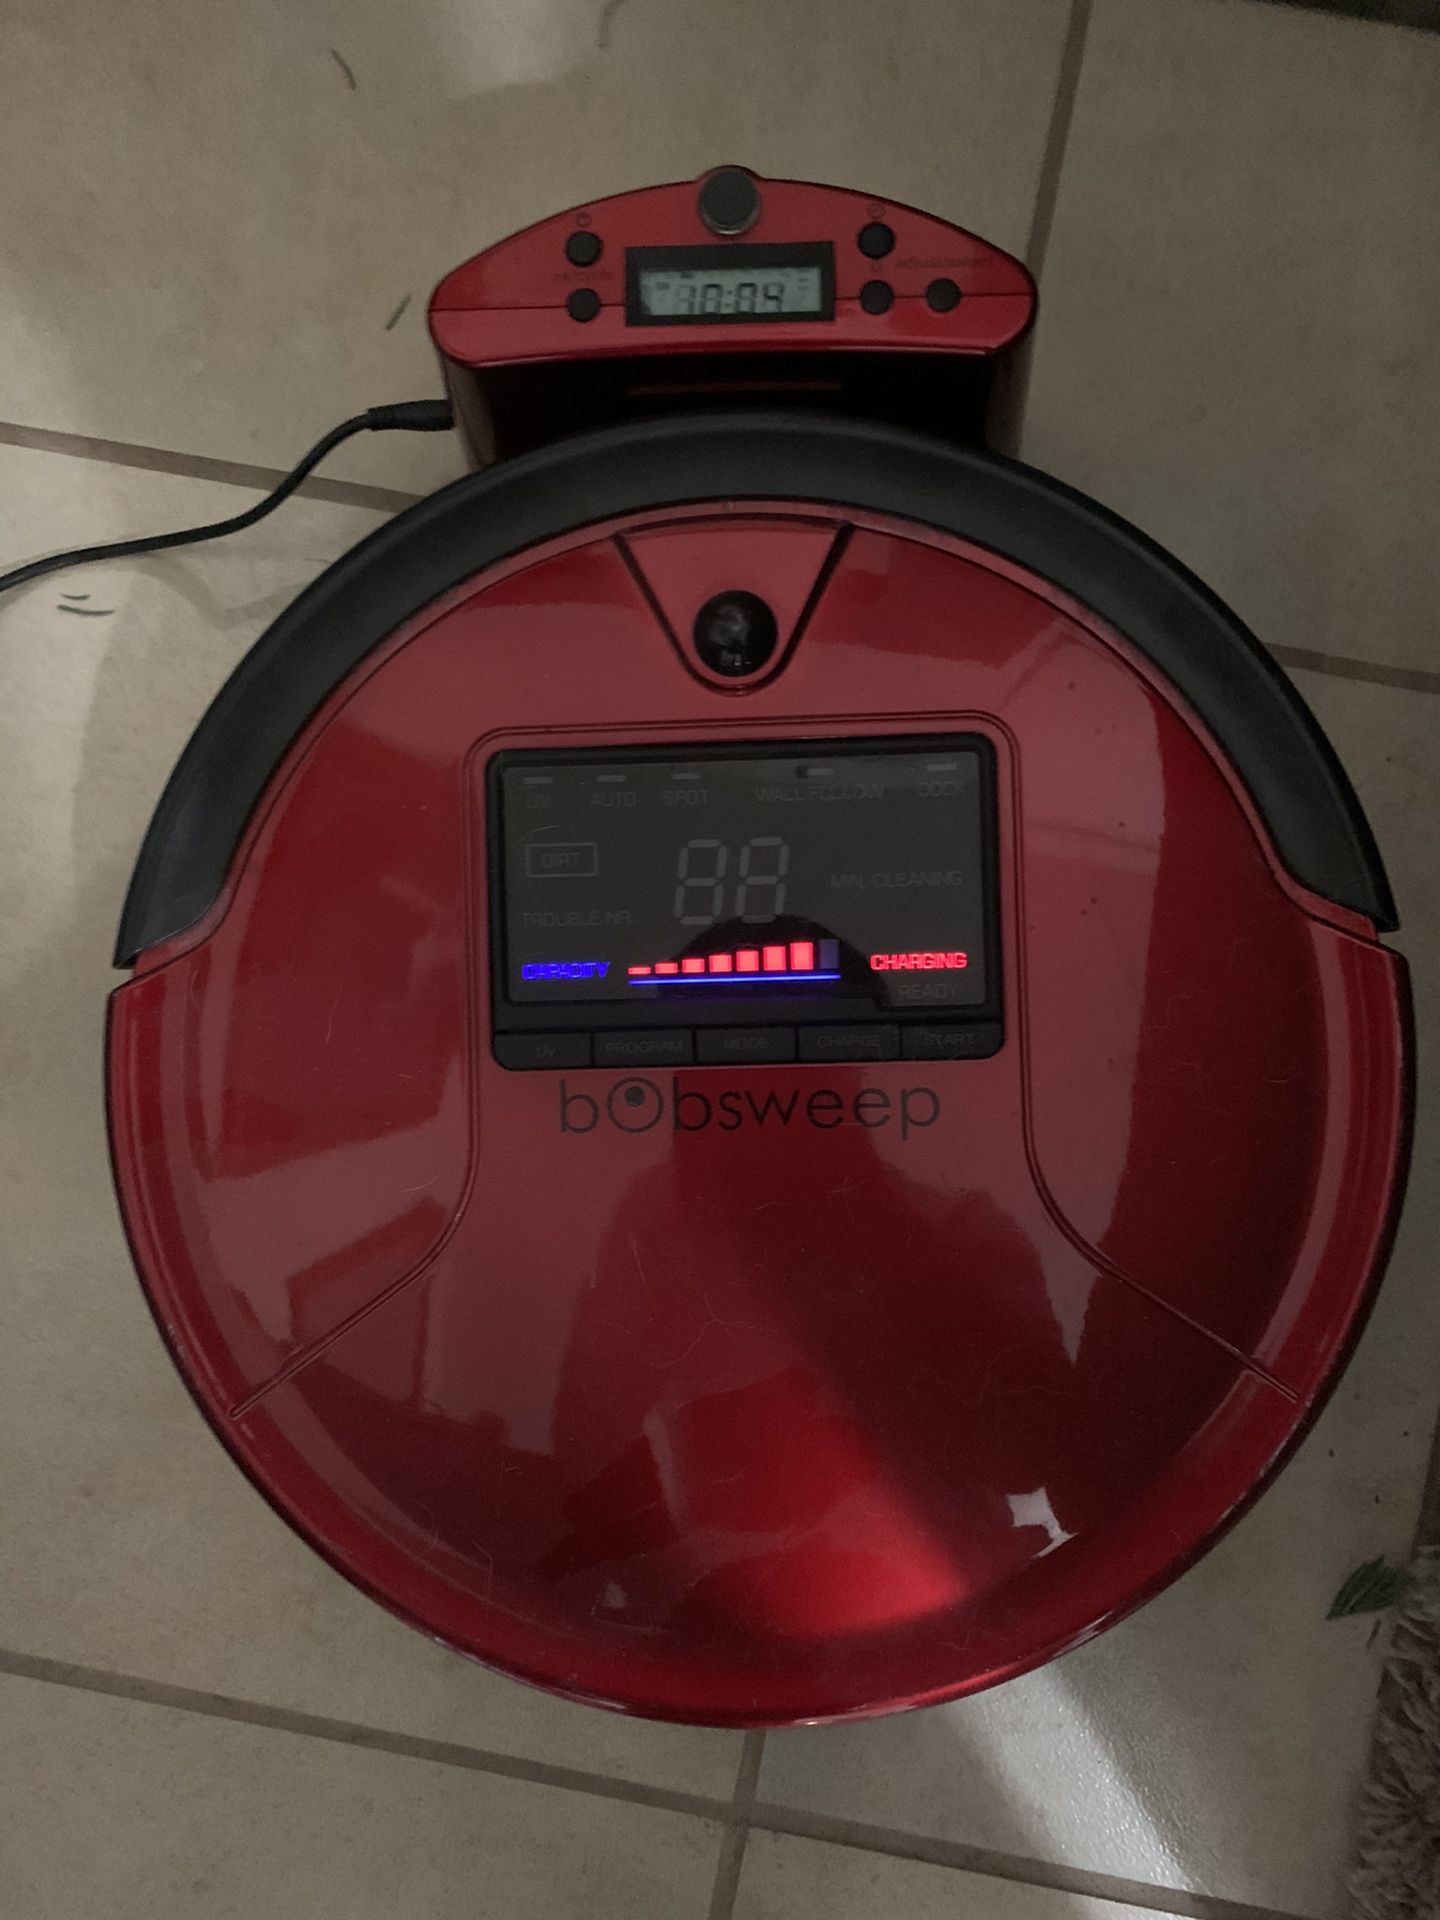 BobSweep Smart Robot Vacuum - Better than Roomba